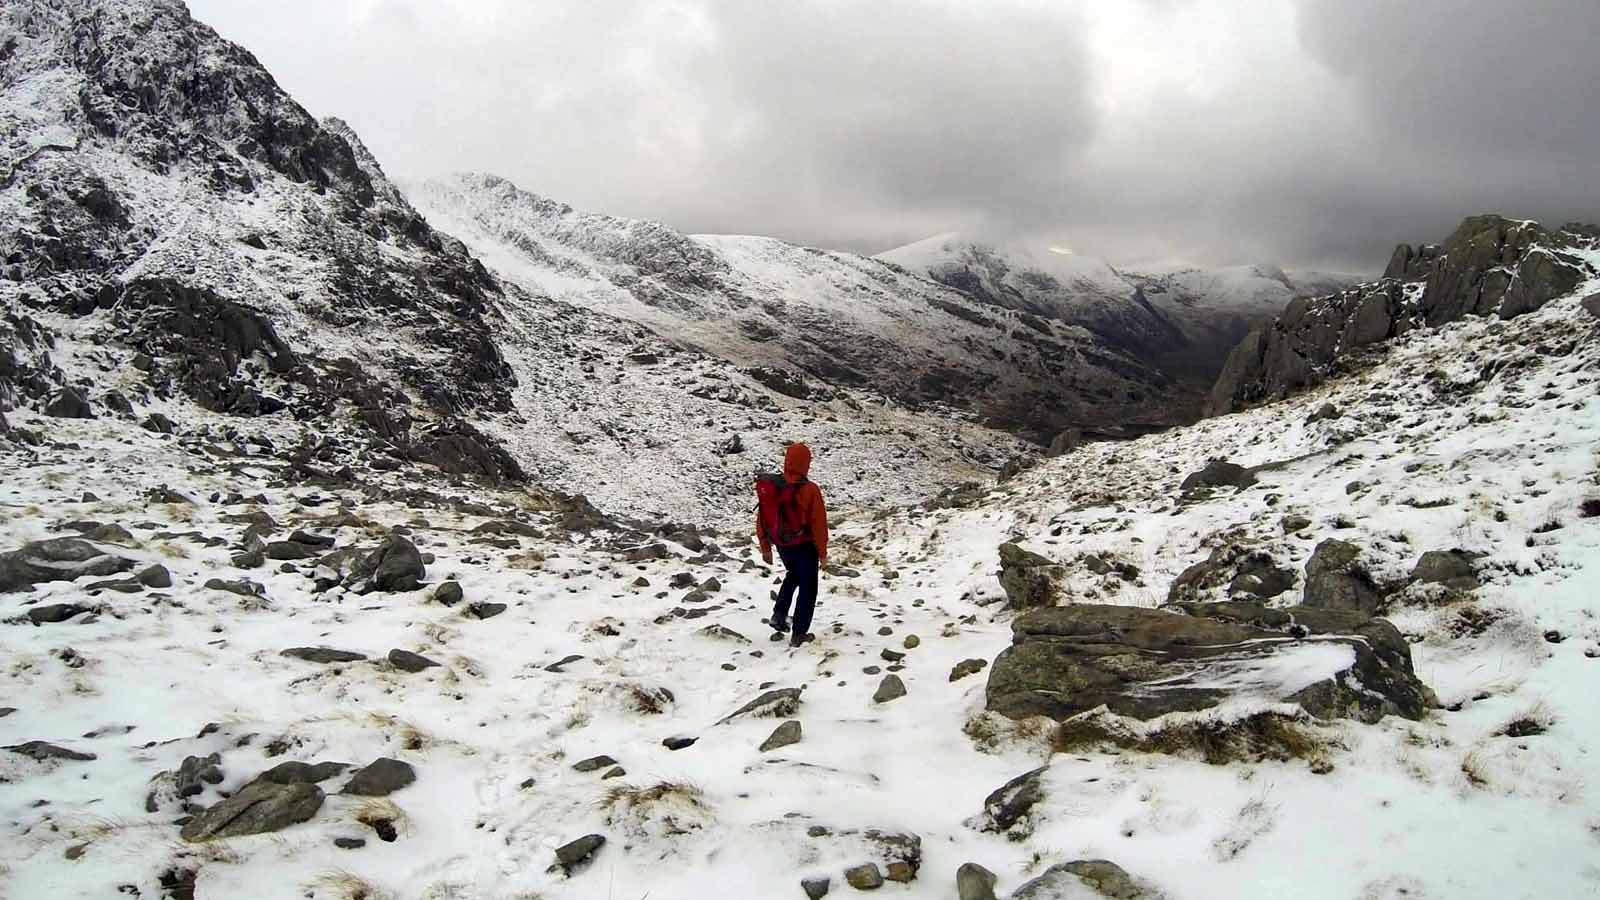 Picture of the author descending a snow dusted and deserted Moel Hebog in western Snowdonia.